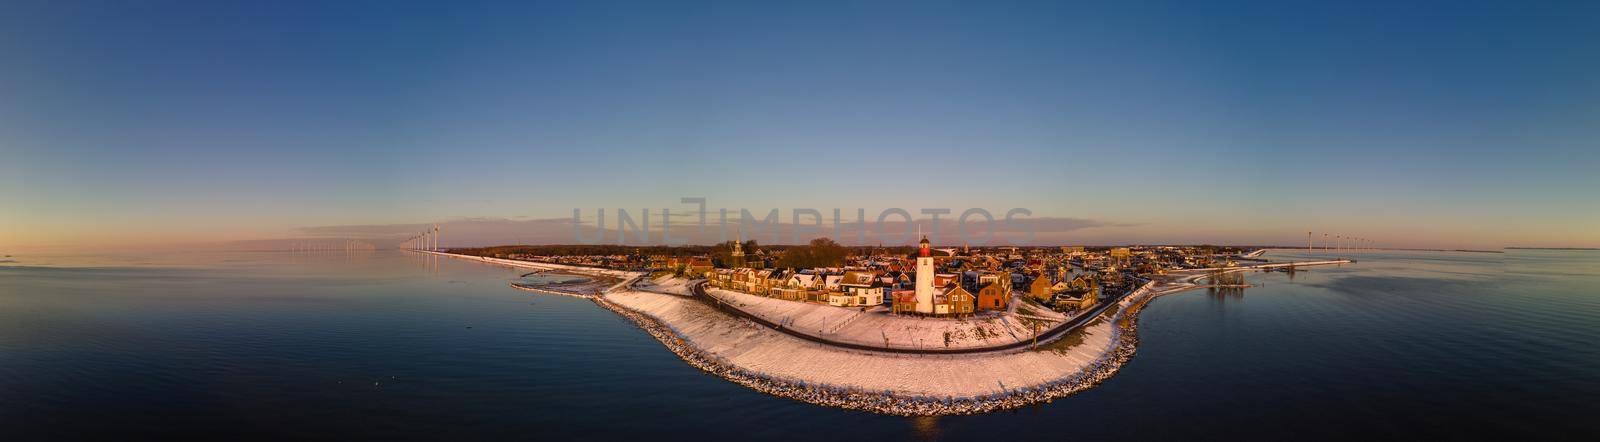 Panoramic view at the lighthouse of Urk Flevoland Netherlands, Urk during winter with white snow covered the beach by fokkebok